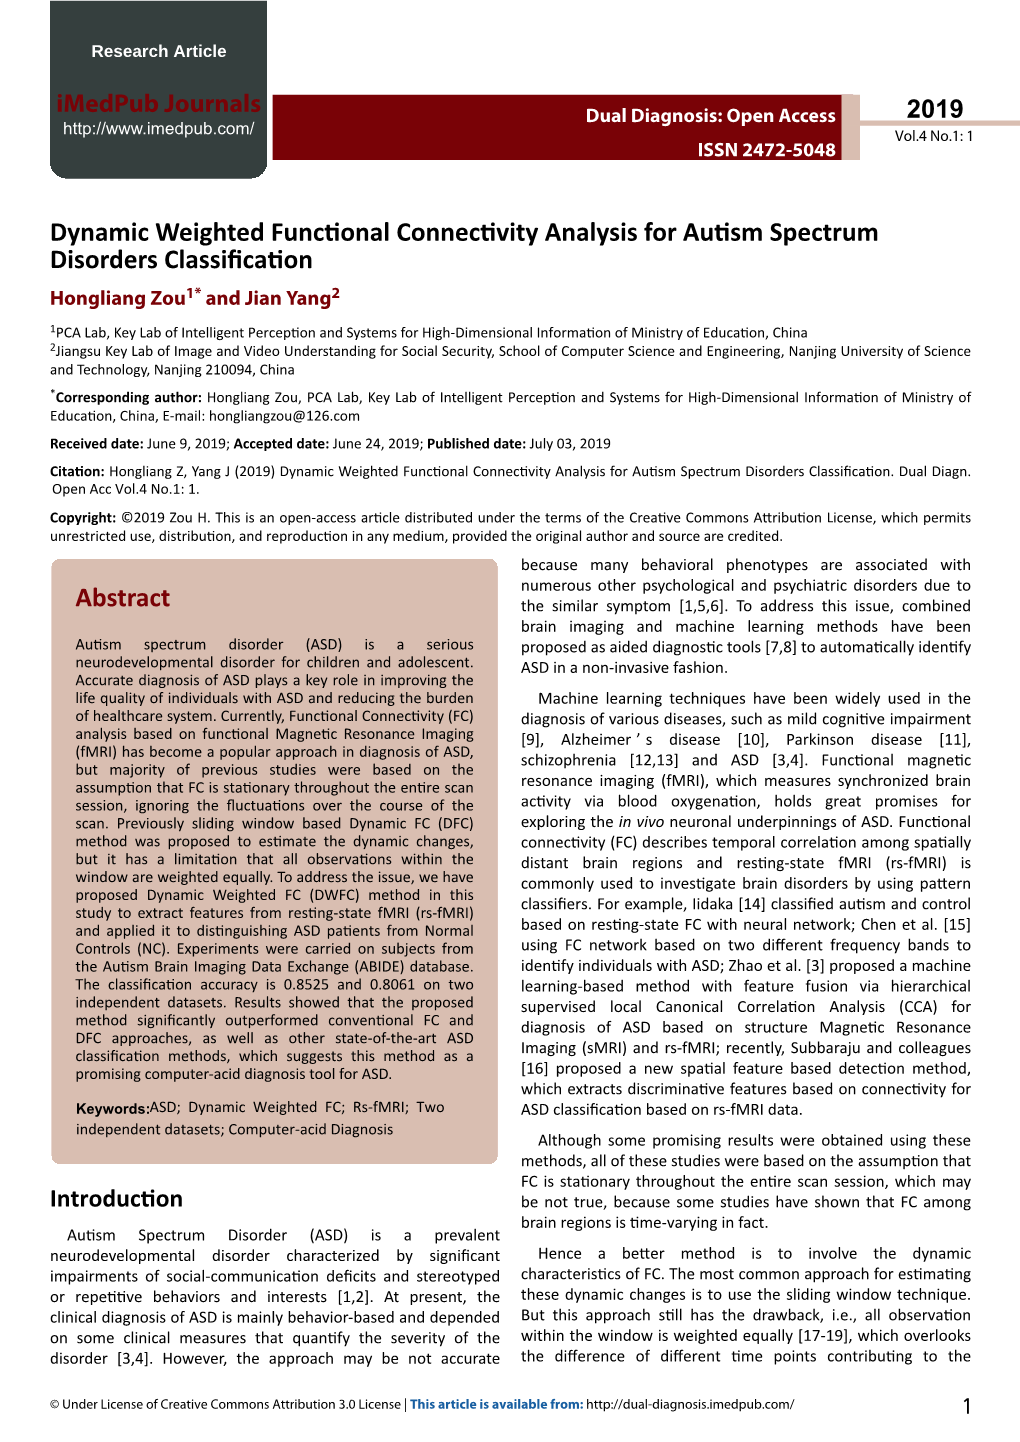 Dynamic Weighted Functional Connectivity Analysis for Autism Spectrum Disorders Classification Hongliang Zou1* and Jian Yang2